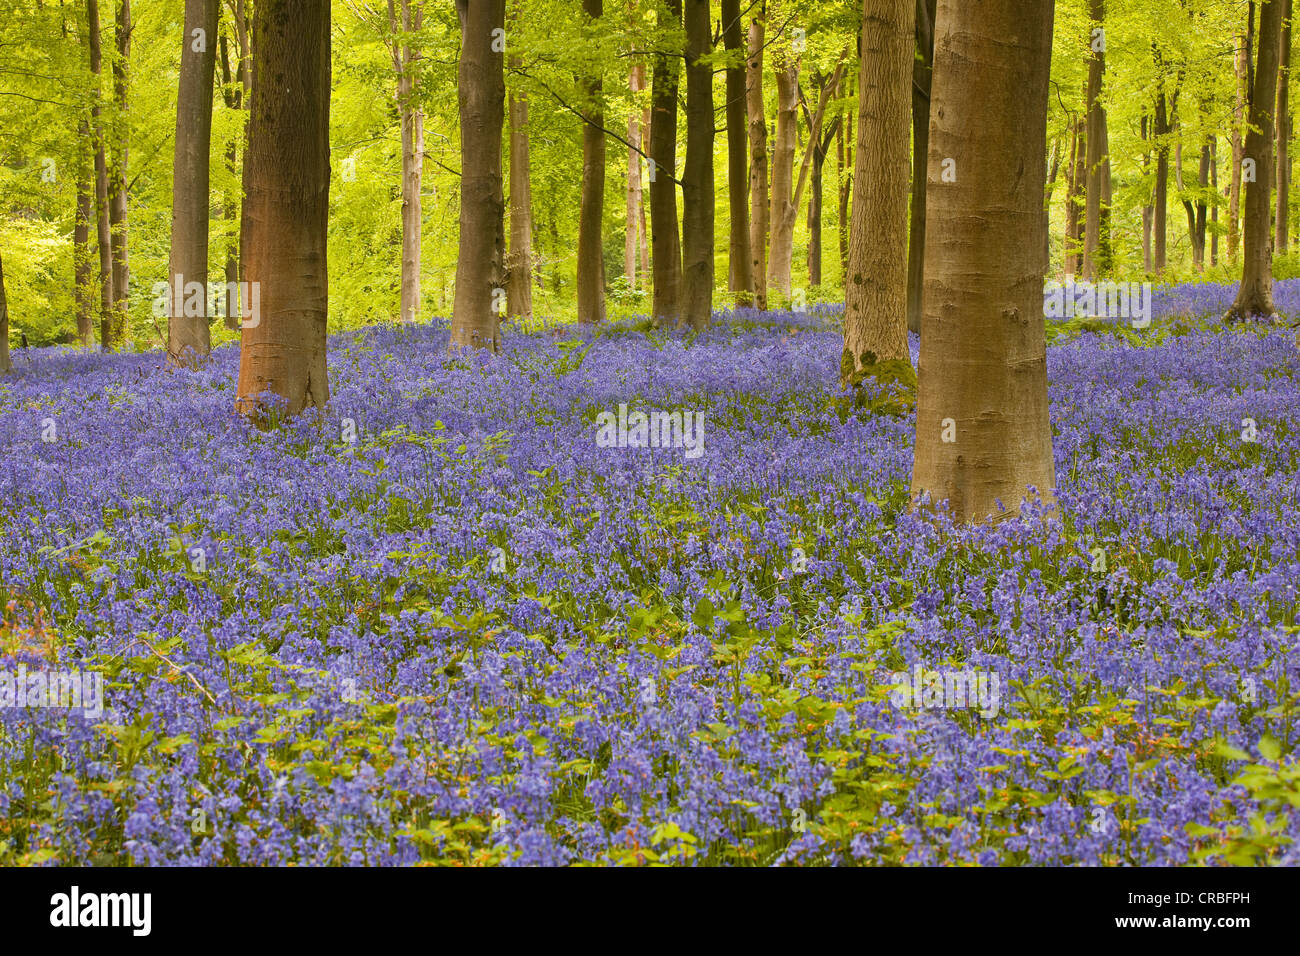 Bluebells couvrir West Woods, Wiltshire, Angleterre, Royaume-Uni. Banque D'Images